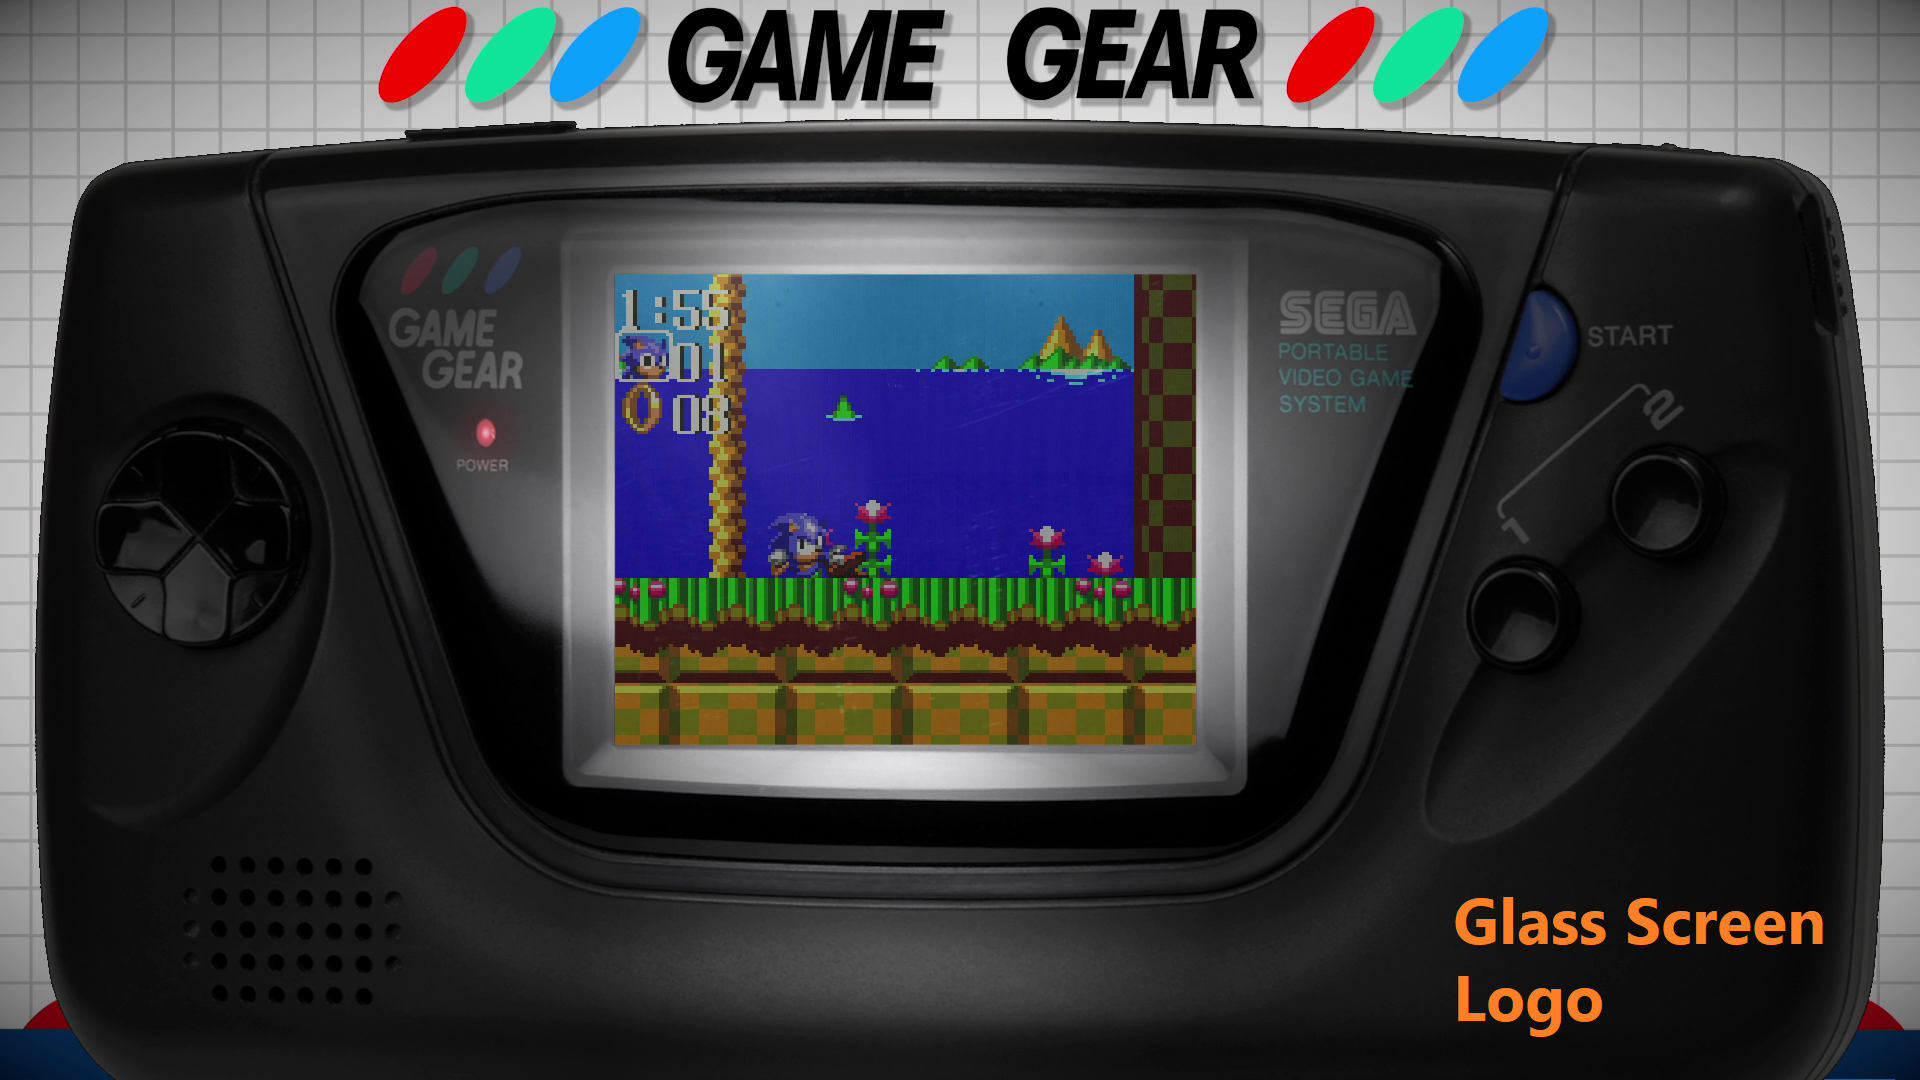 Zkyo's Game Gear Console Overlay